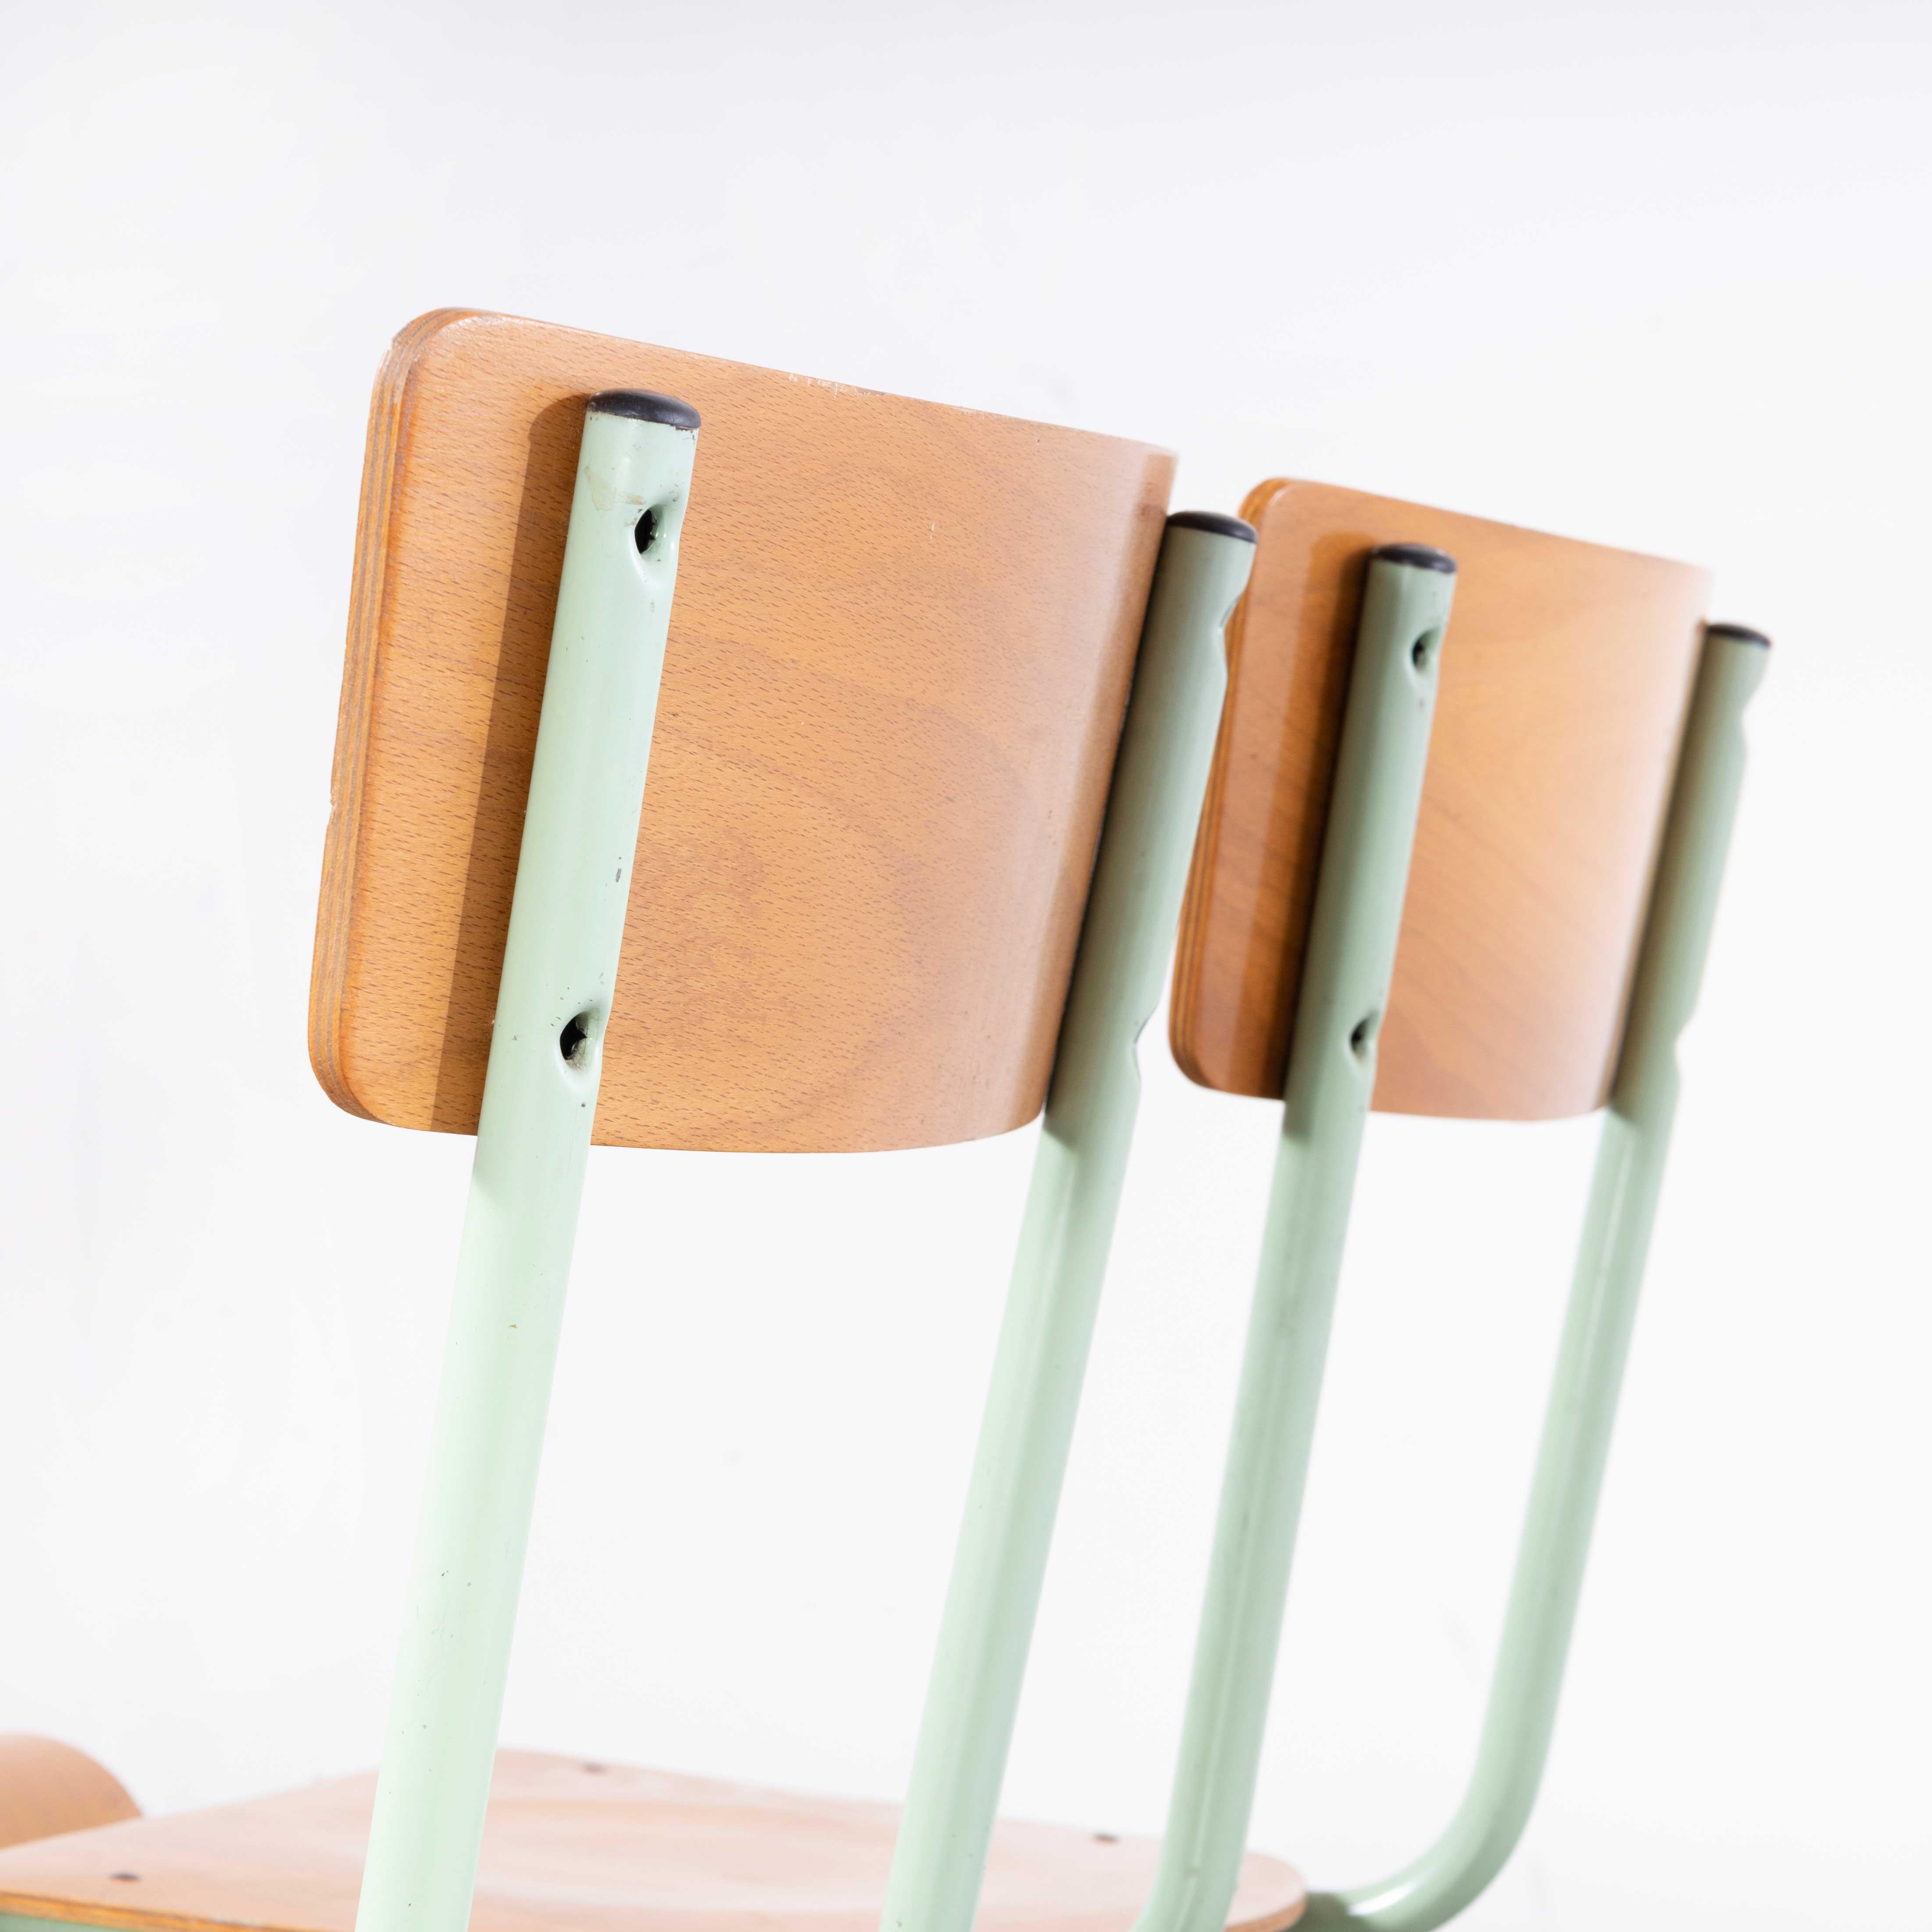 1960’s Original Mint French Stacking University Chairs Wide Back - Set Of Four For Sale 4